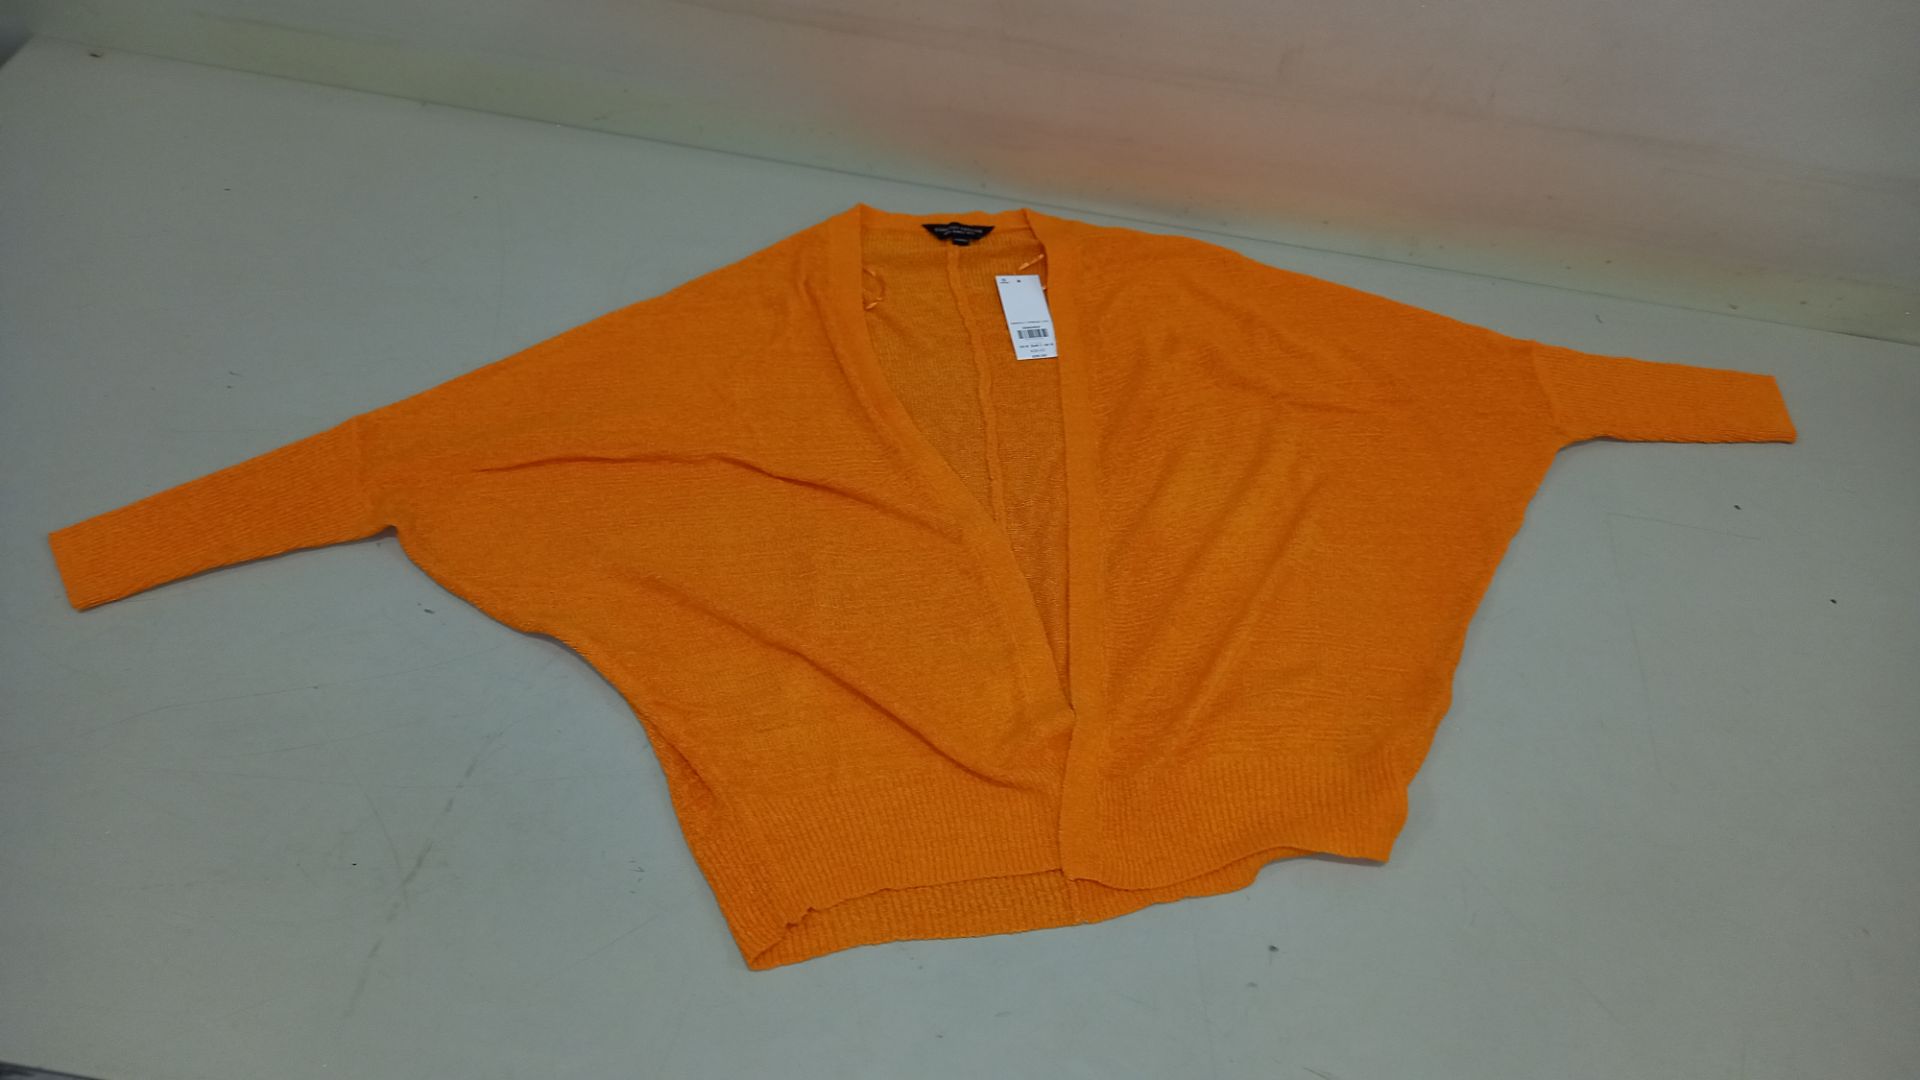 30 X BRAND NEW DOROTHY PERKINS KITTED CARDIGAN IN ORANAGE ( ALL SIZE M ) IN 2 BOXES